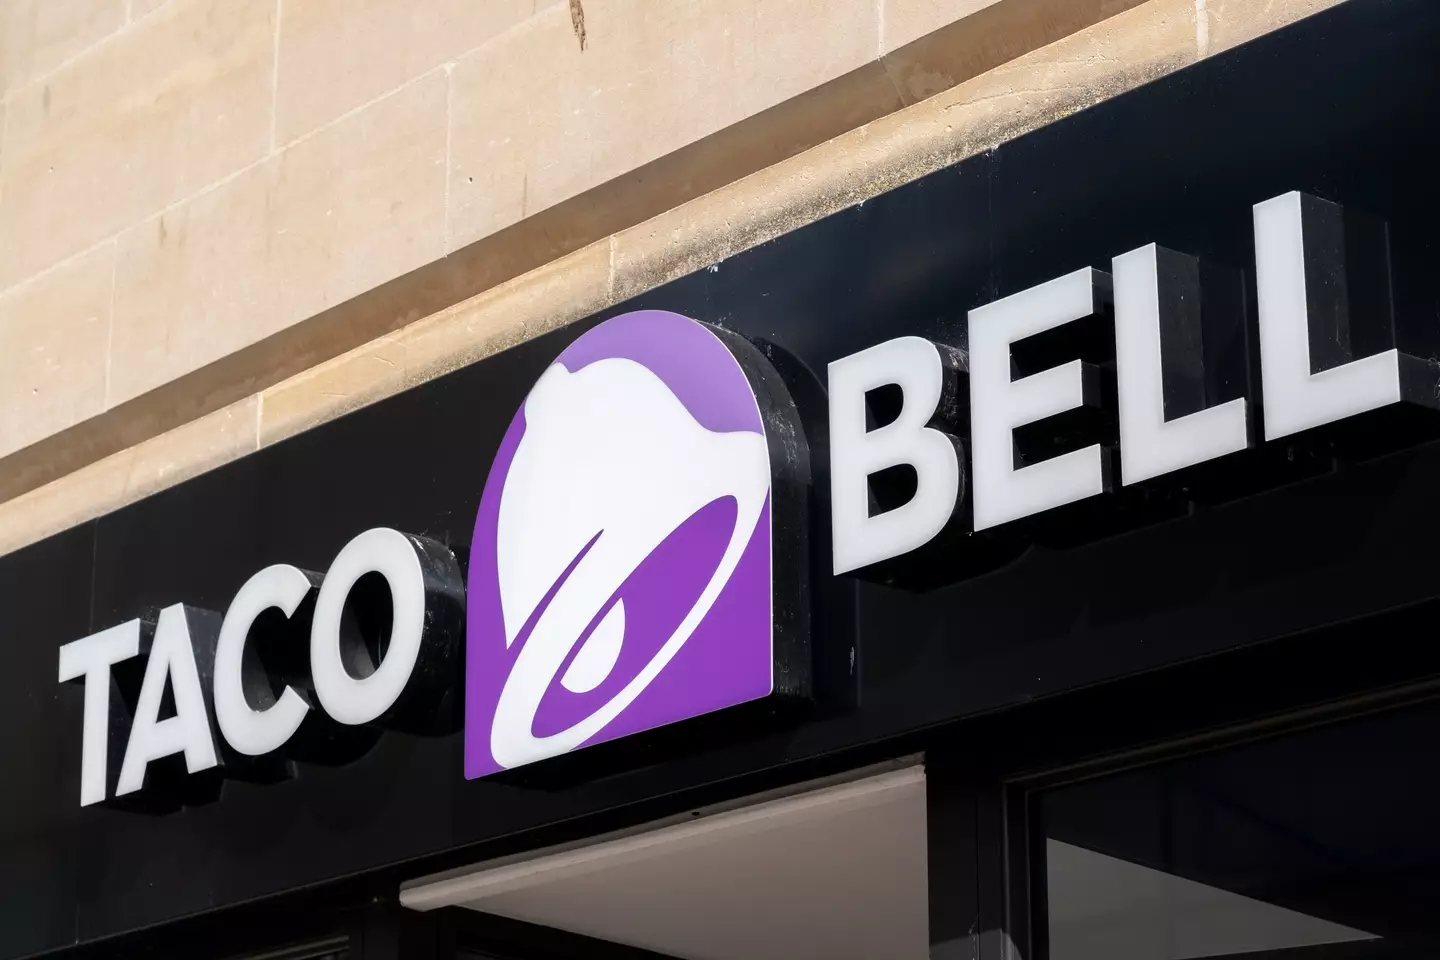 A Taco Bell employee was arrested after police said multiple people complained of being scammed.